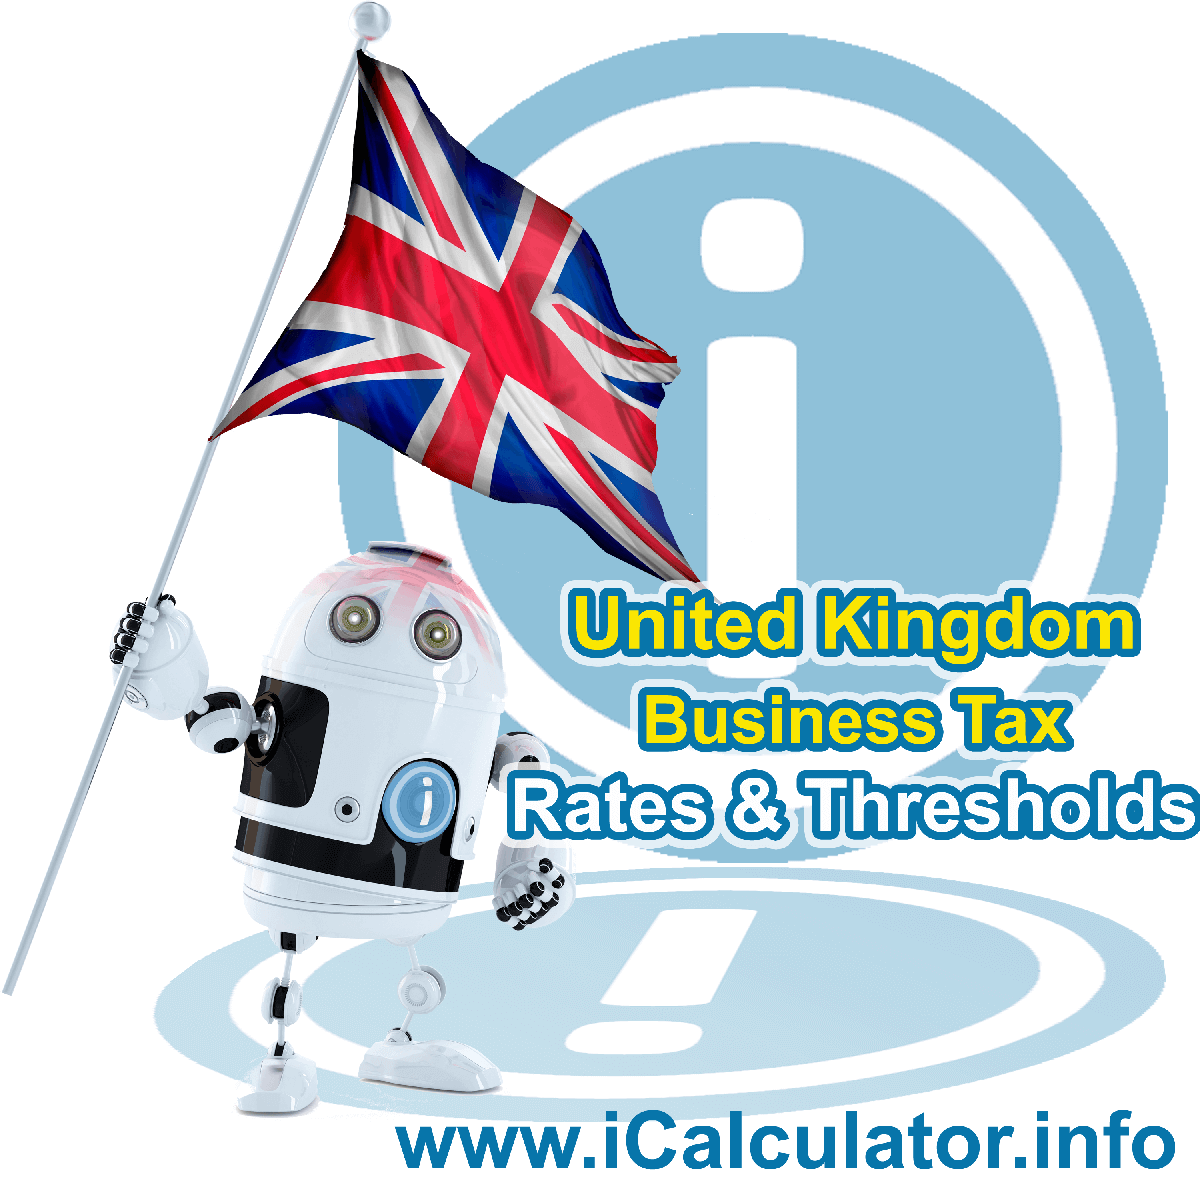 United Kingdom Corporation Tax Rates in 2015. This image shows the United Kingdom flag and information relating to the corporation tax formula for the United Kingdom Corporation Tax Calculator in 2015